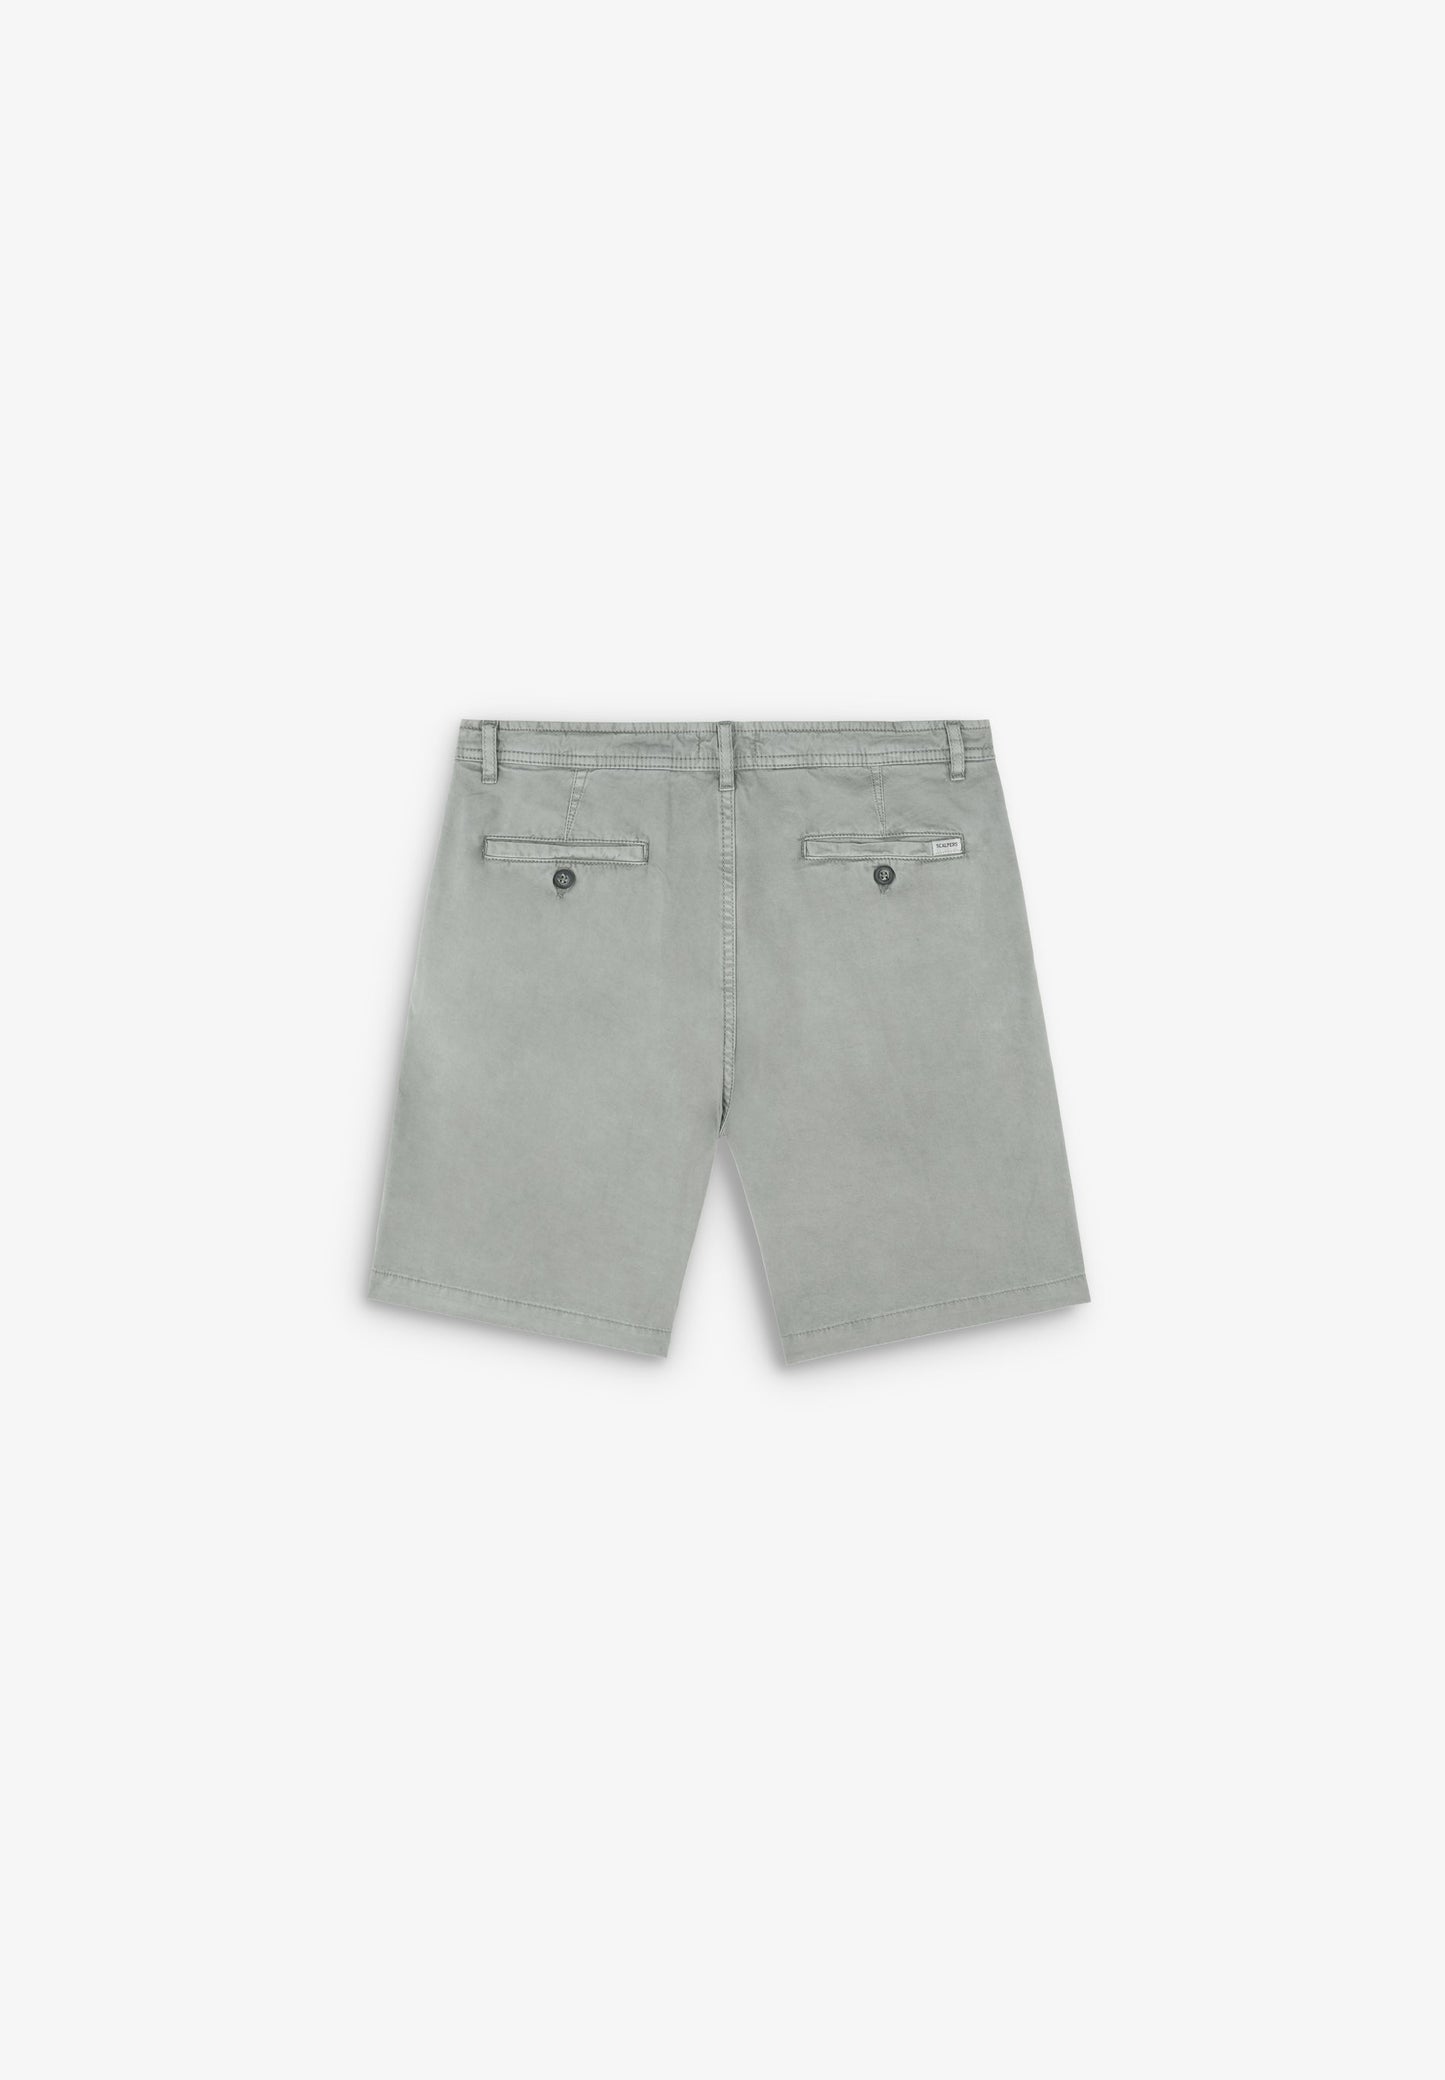 OUTFITTERS BT SHORTS